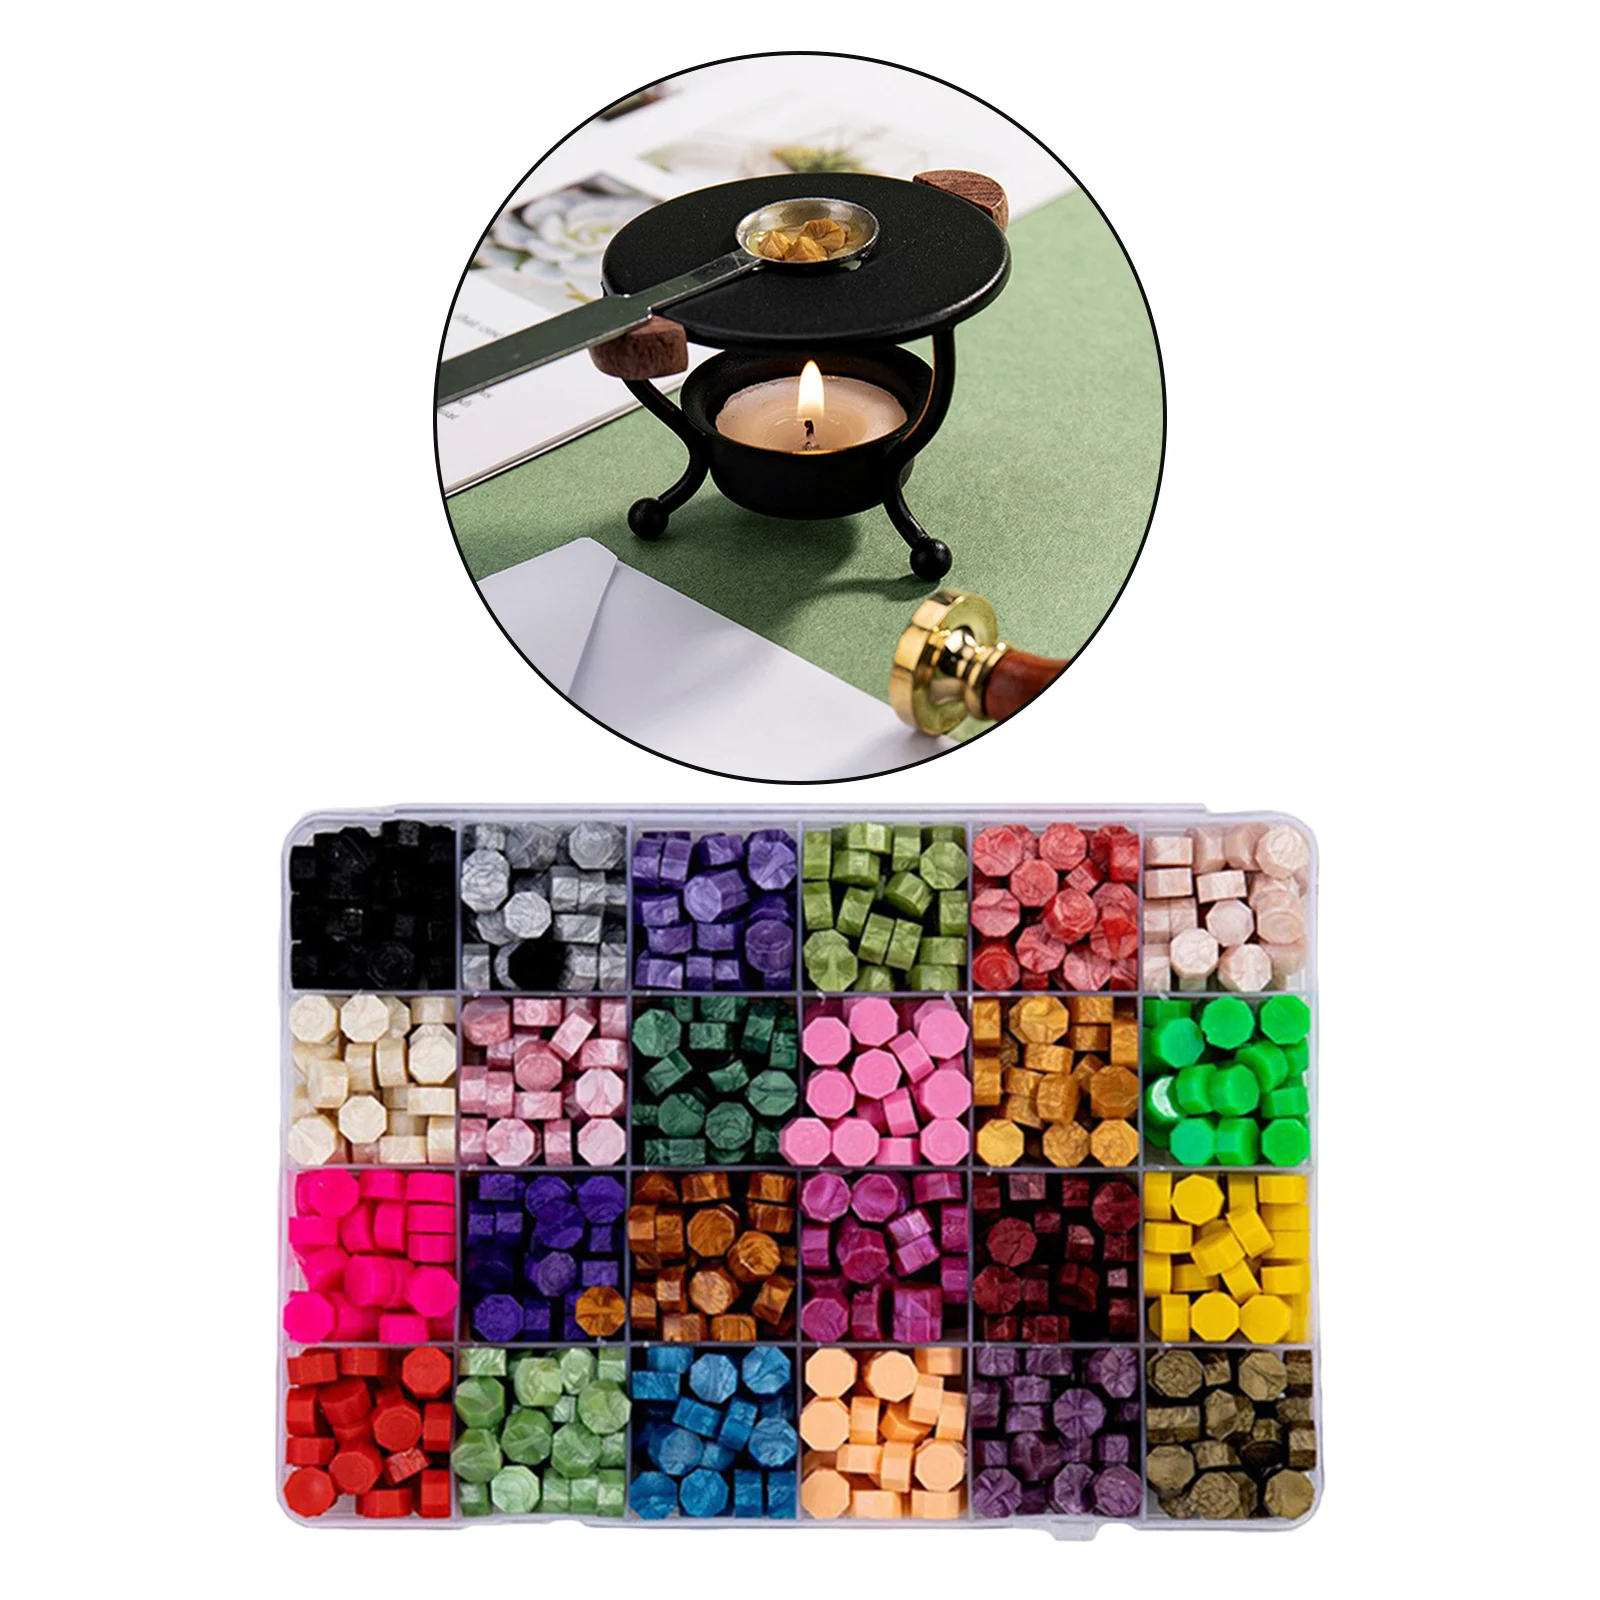 600Pcs Seal Stamp Wax Colorful Beads Wax Seal Stamps for Envelope Documents Wedding Birthday Party Invitation Sealing Wax Card